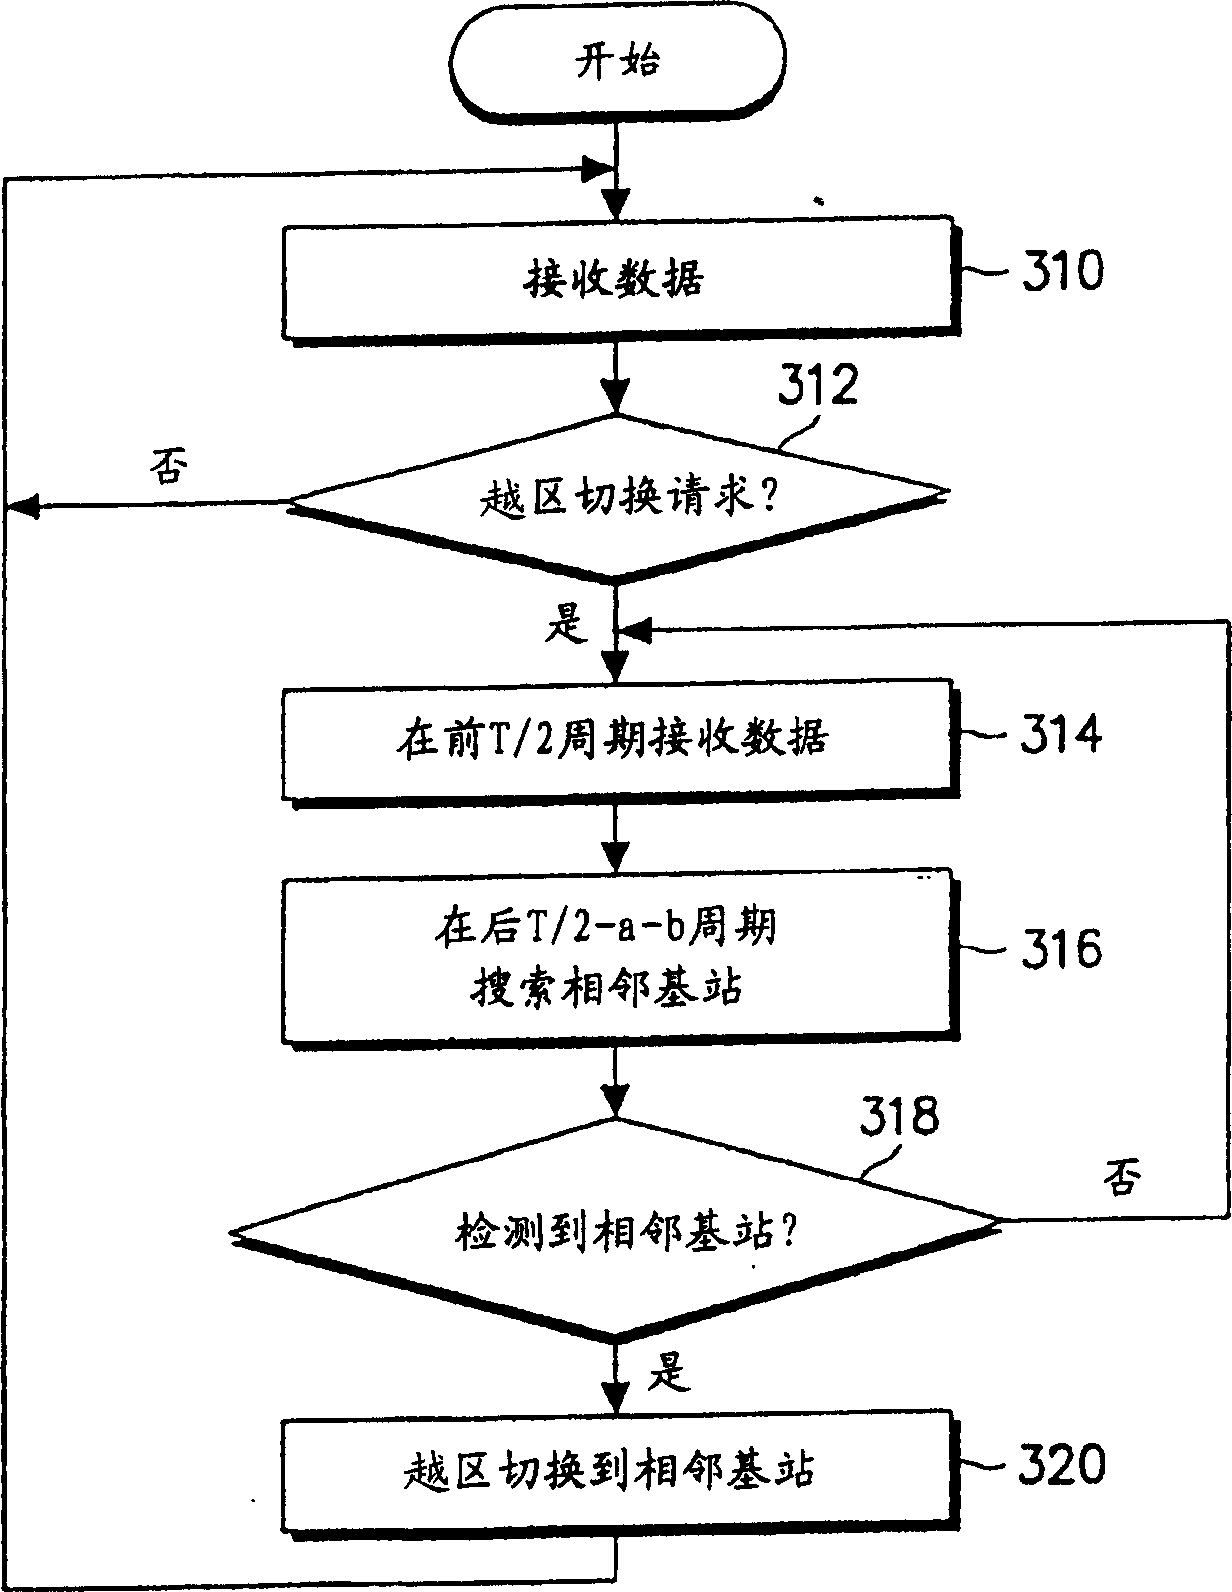 Device and method for performing handoff in mobile communication system